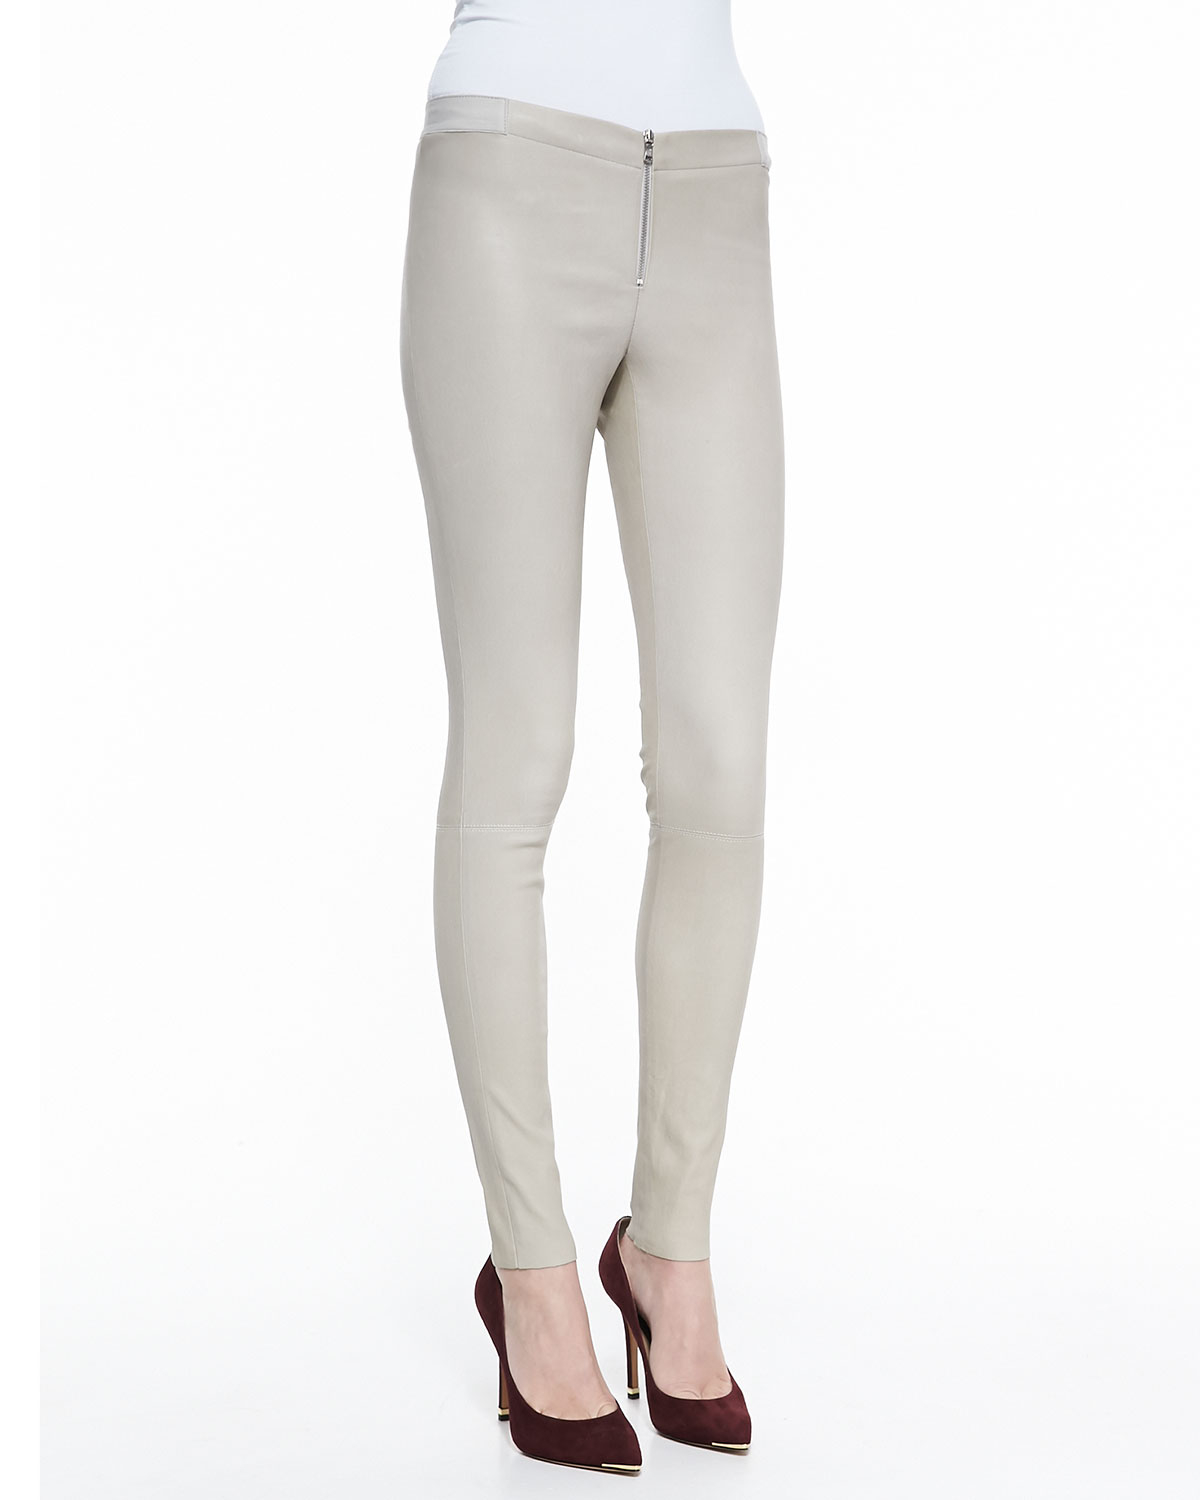 Download Alice + Olivia Front-zip Leather Leggings in Gray - Lyst